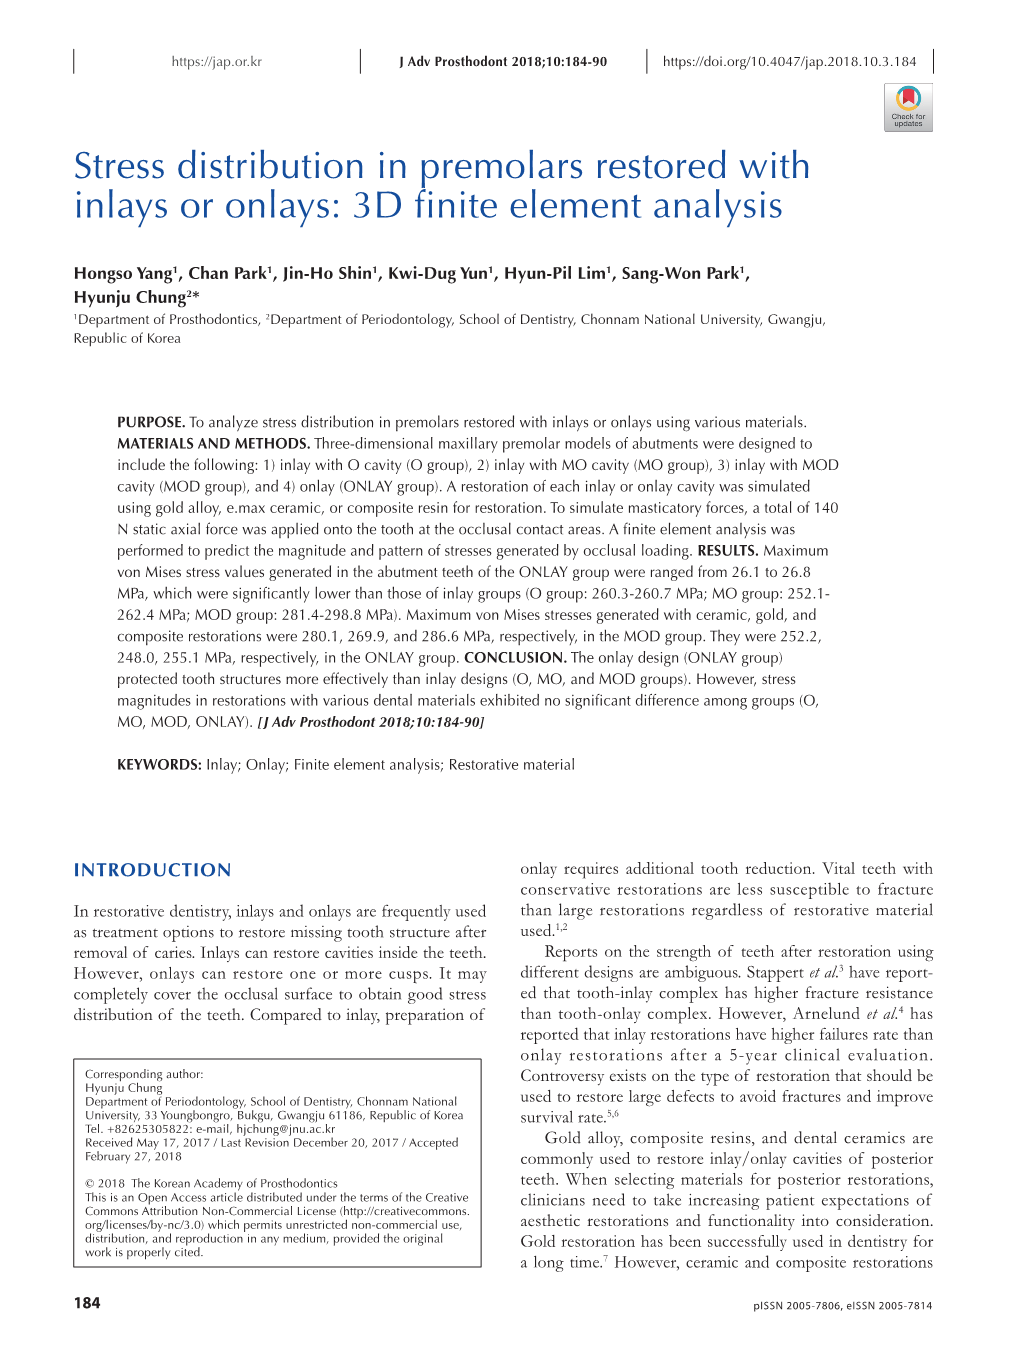 Stress Distribution in Premolars Restored with Inlays Or Onlays: 3D Finite Element Analysis